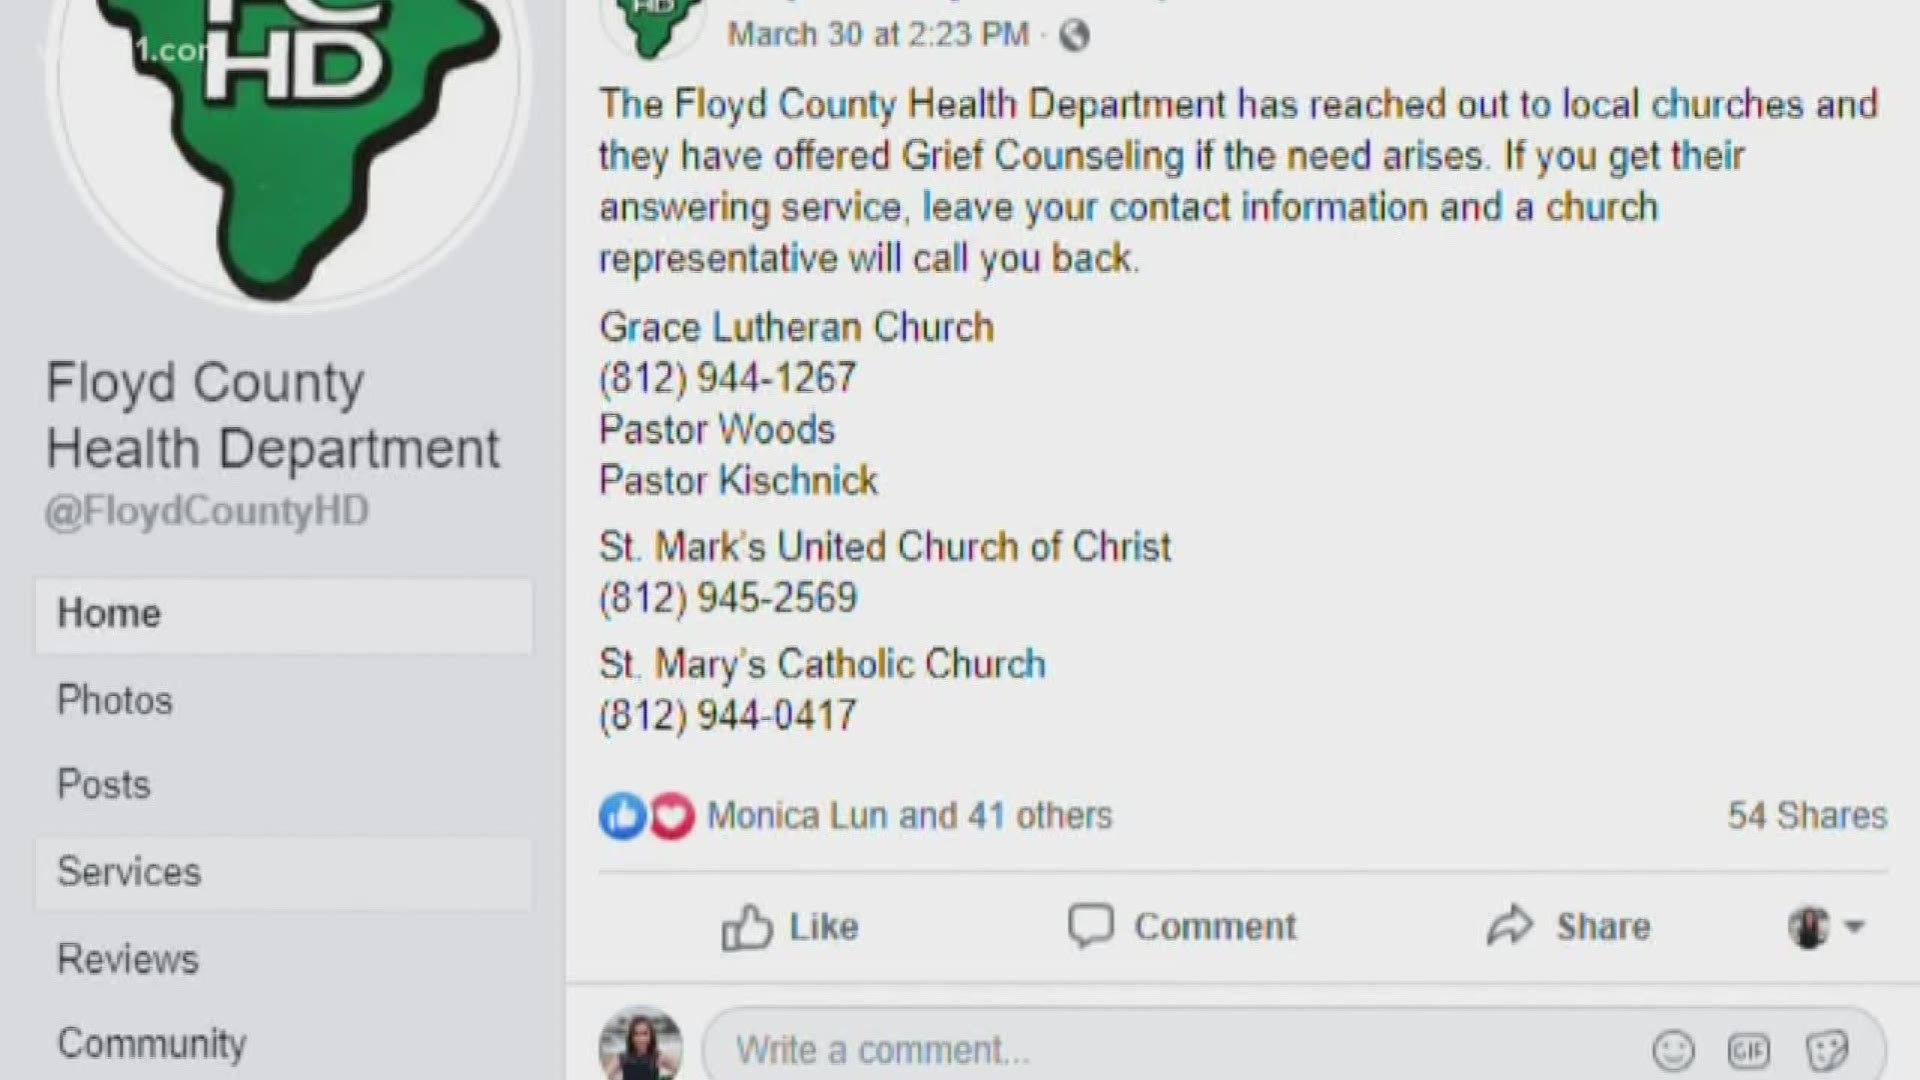 As COVID-19 spreads through the Floyd County community, one local church is partnering with the health department for grief counseling.